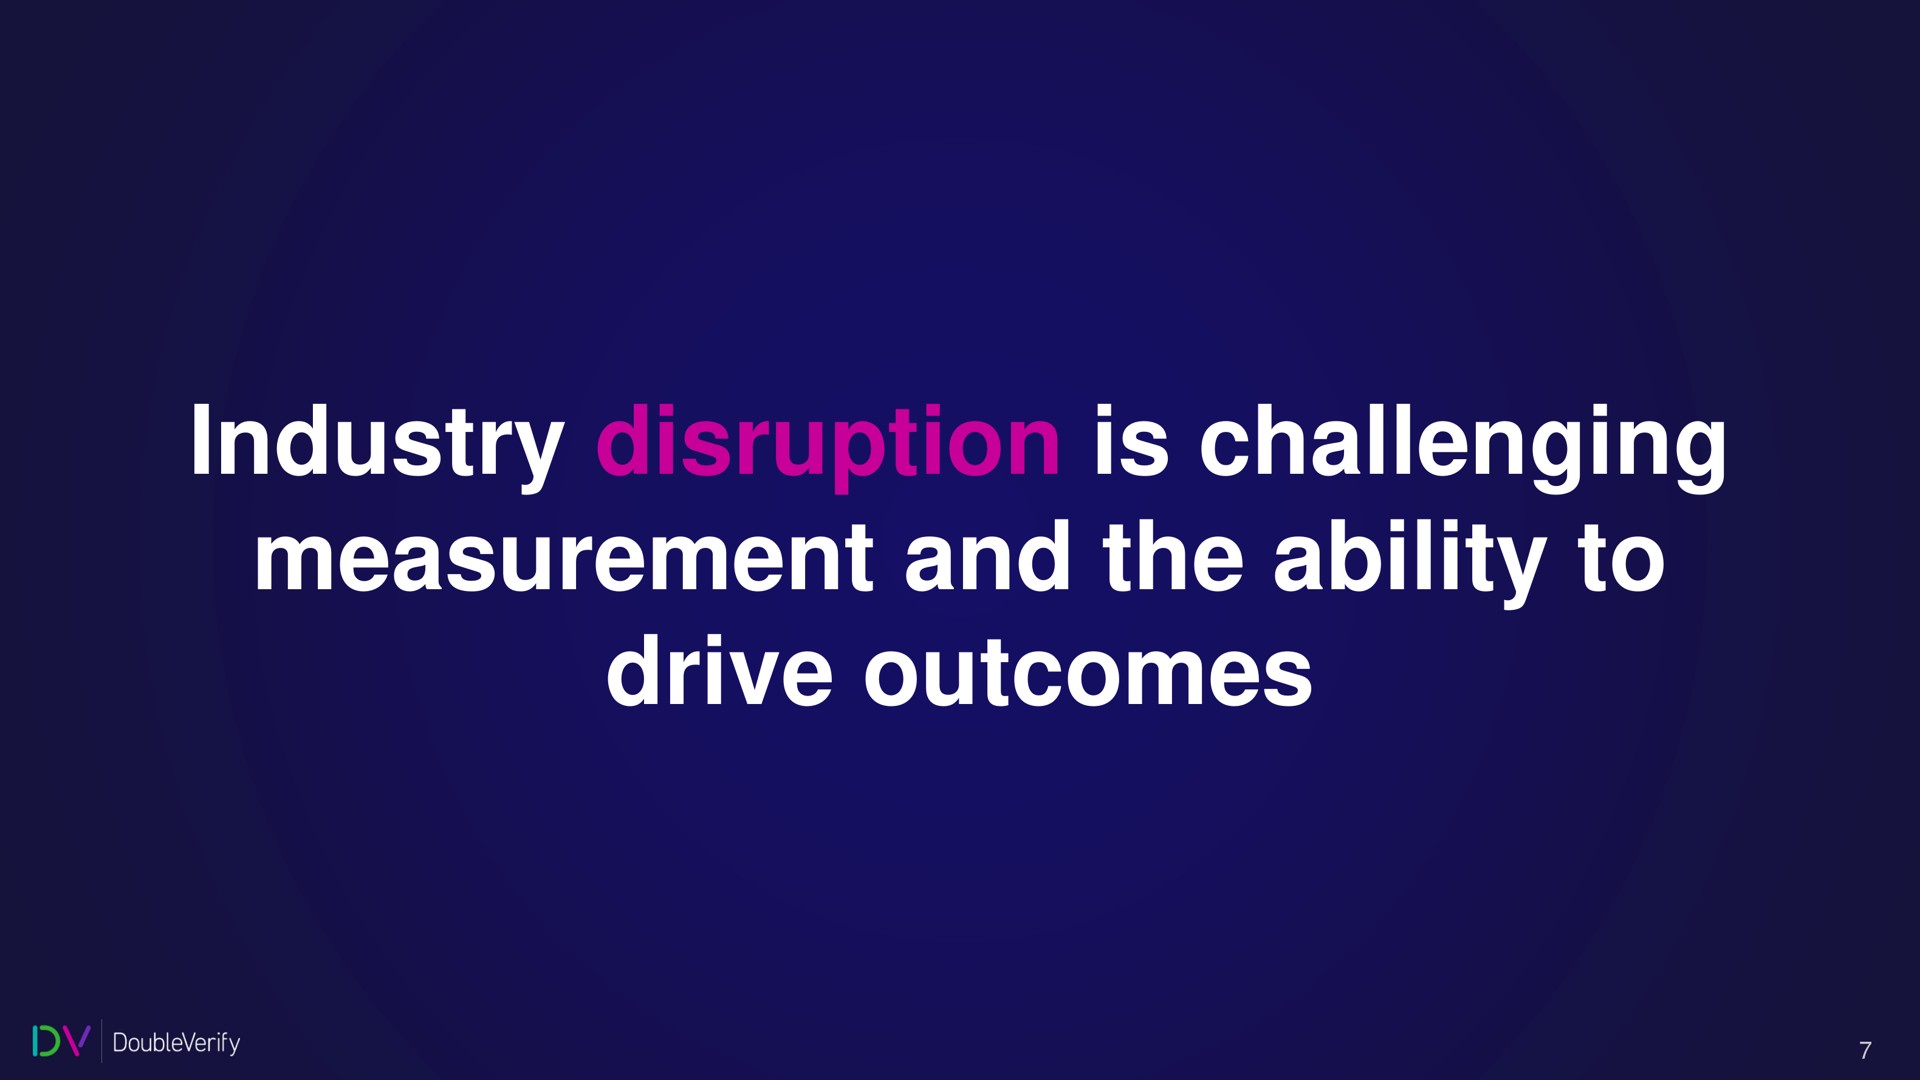 industry disruption is challenging measurement and the ability to drive outcomes | DoubleVerify